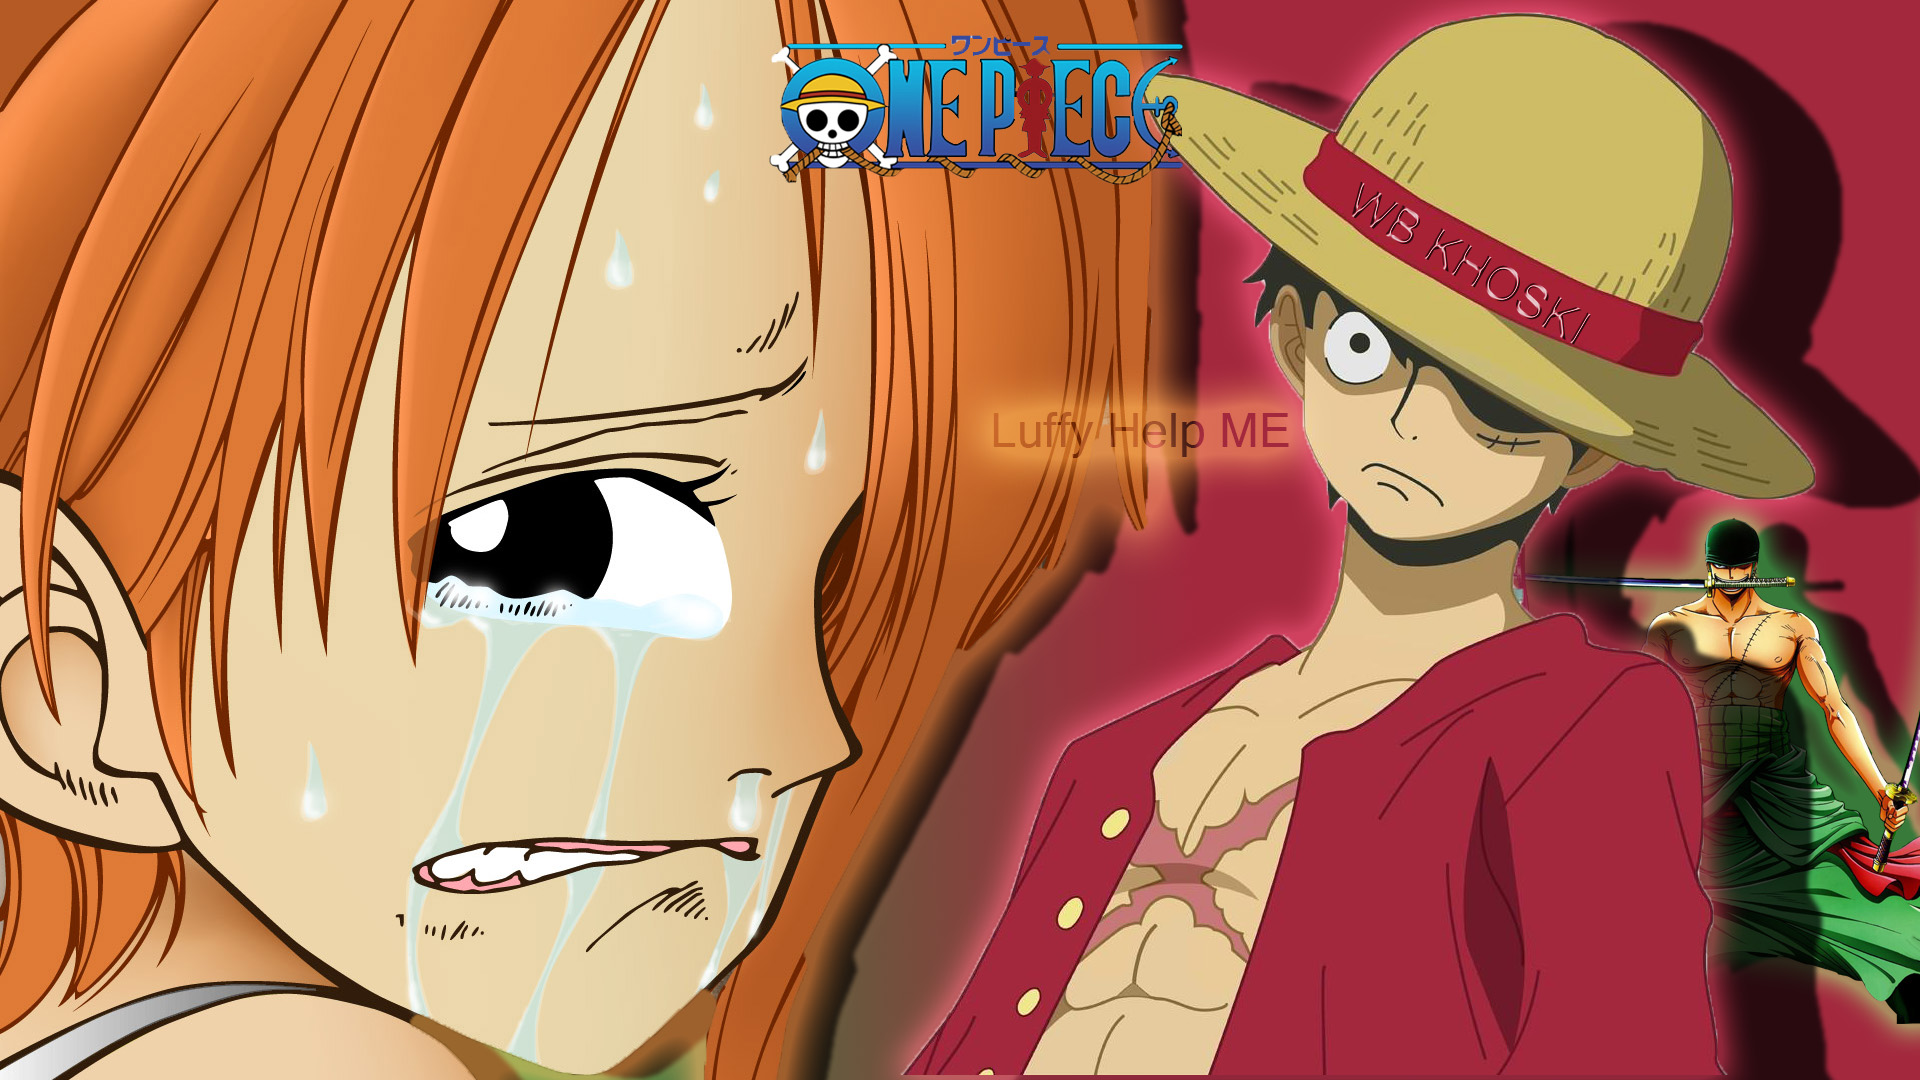 Luffy Help me Full HD Wallpaper and Background Image | 1920x1080 | ID